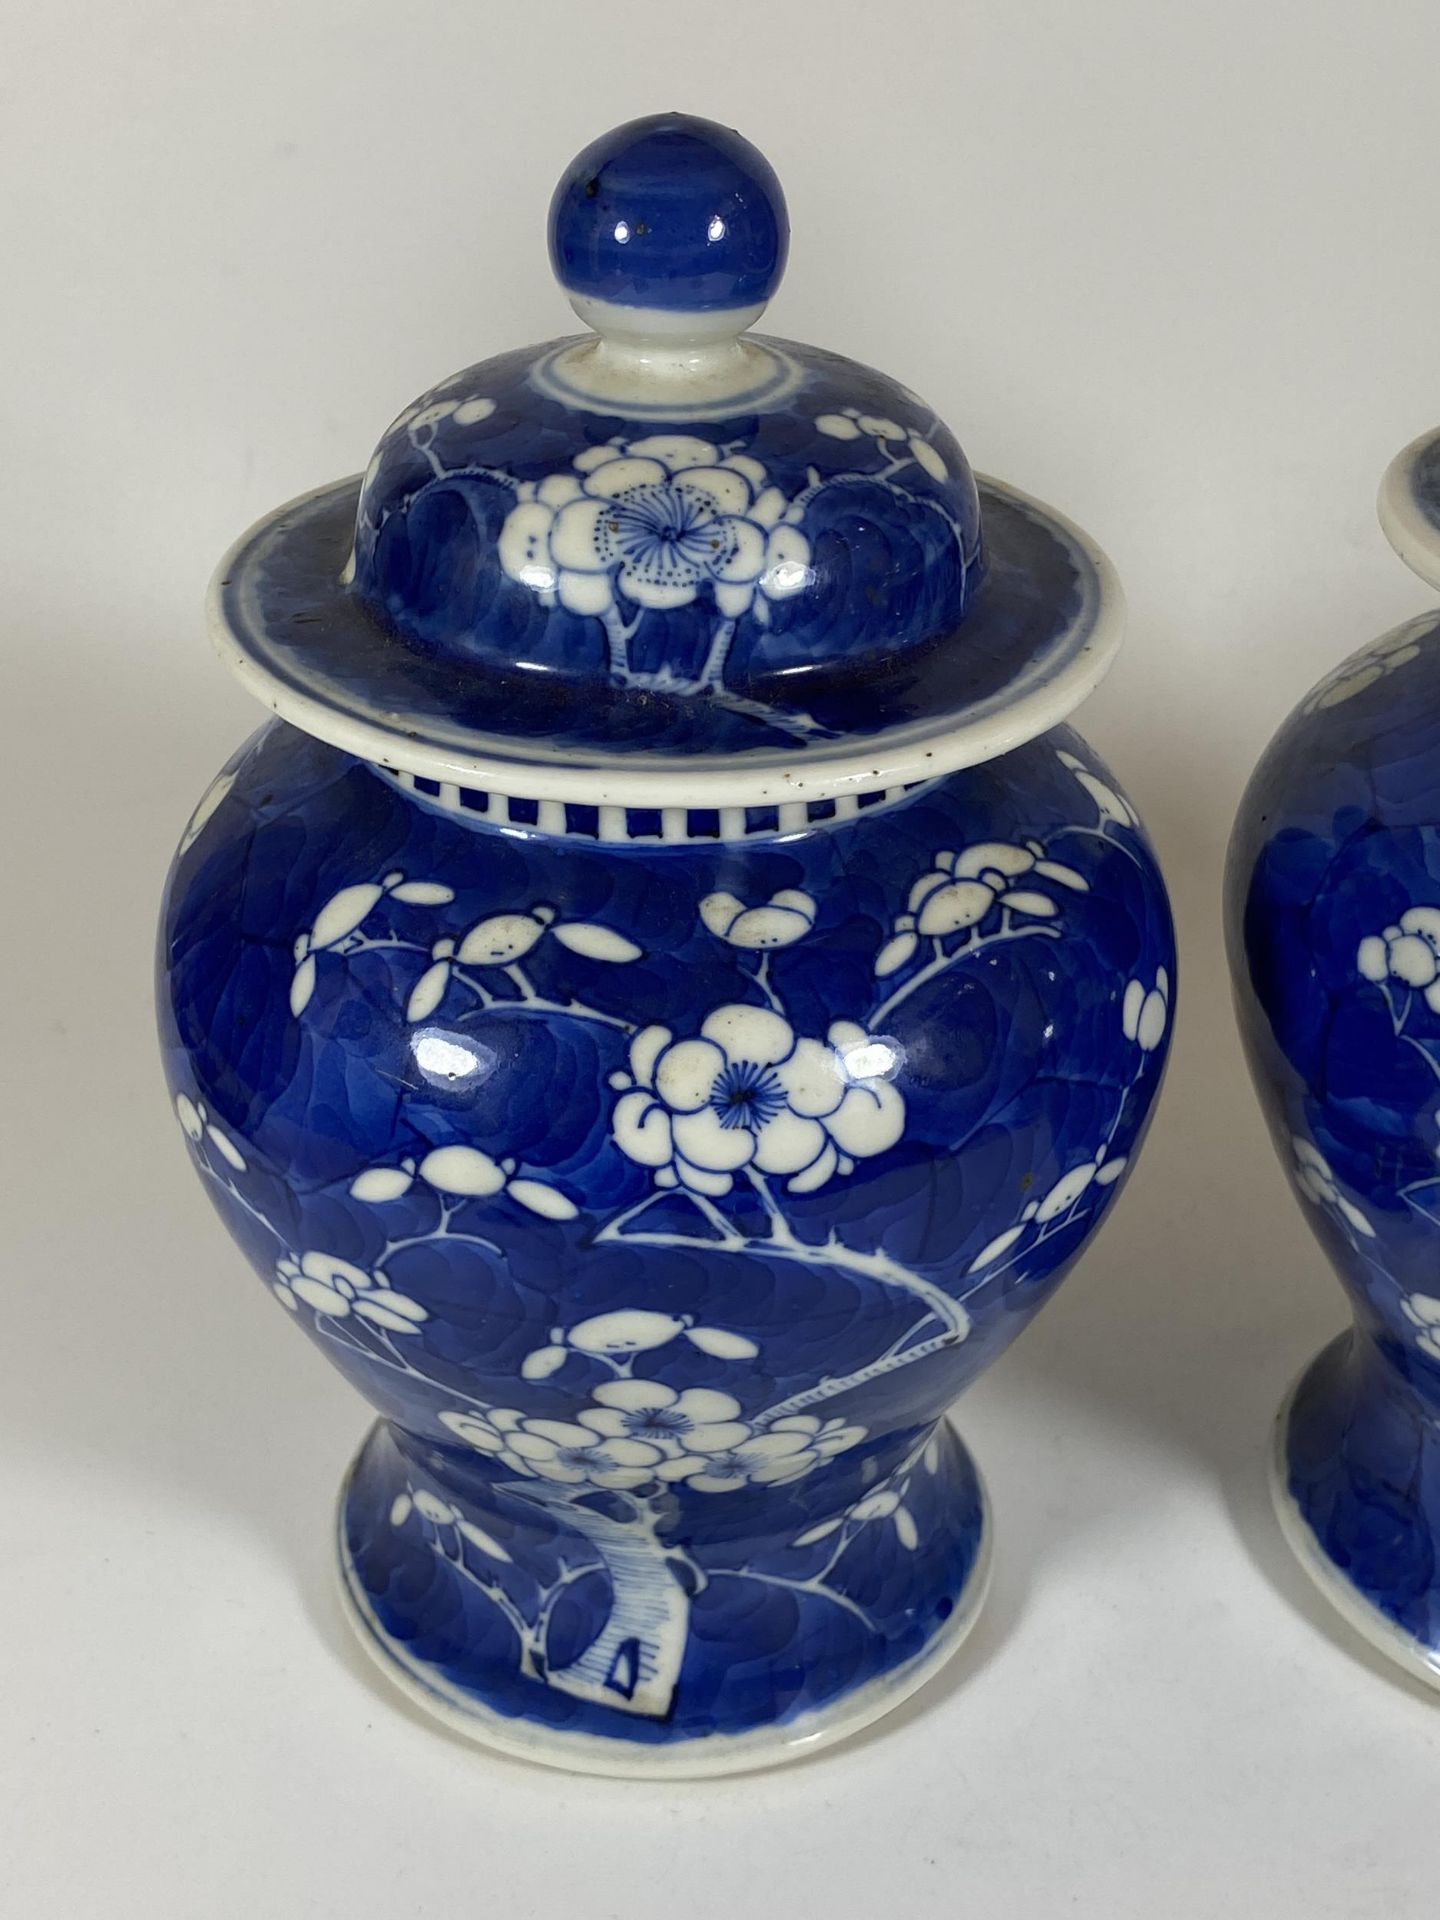 A PAIR OF 19TH/20TH CENTURY CHINESE BLUE AND WHITE PRUNUS BLOSSOM PATTERN PORCELAIN LIDDED TEMPLE - Image 2 of 11